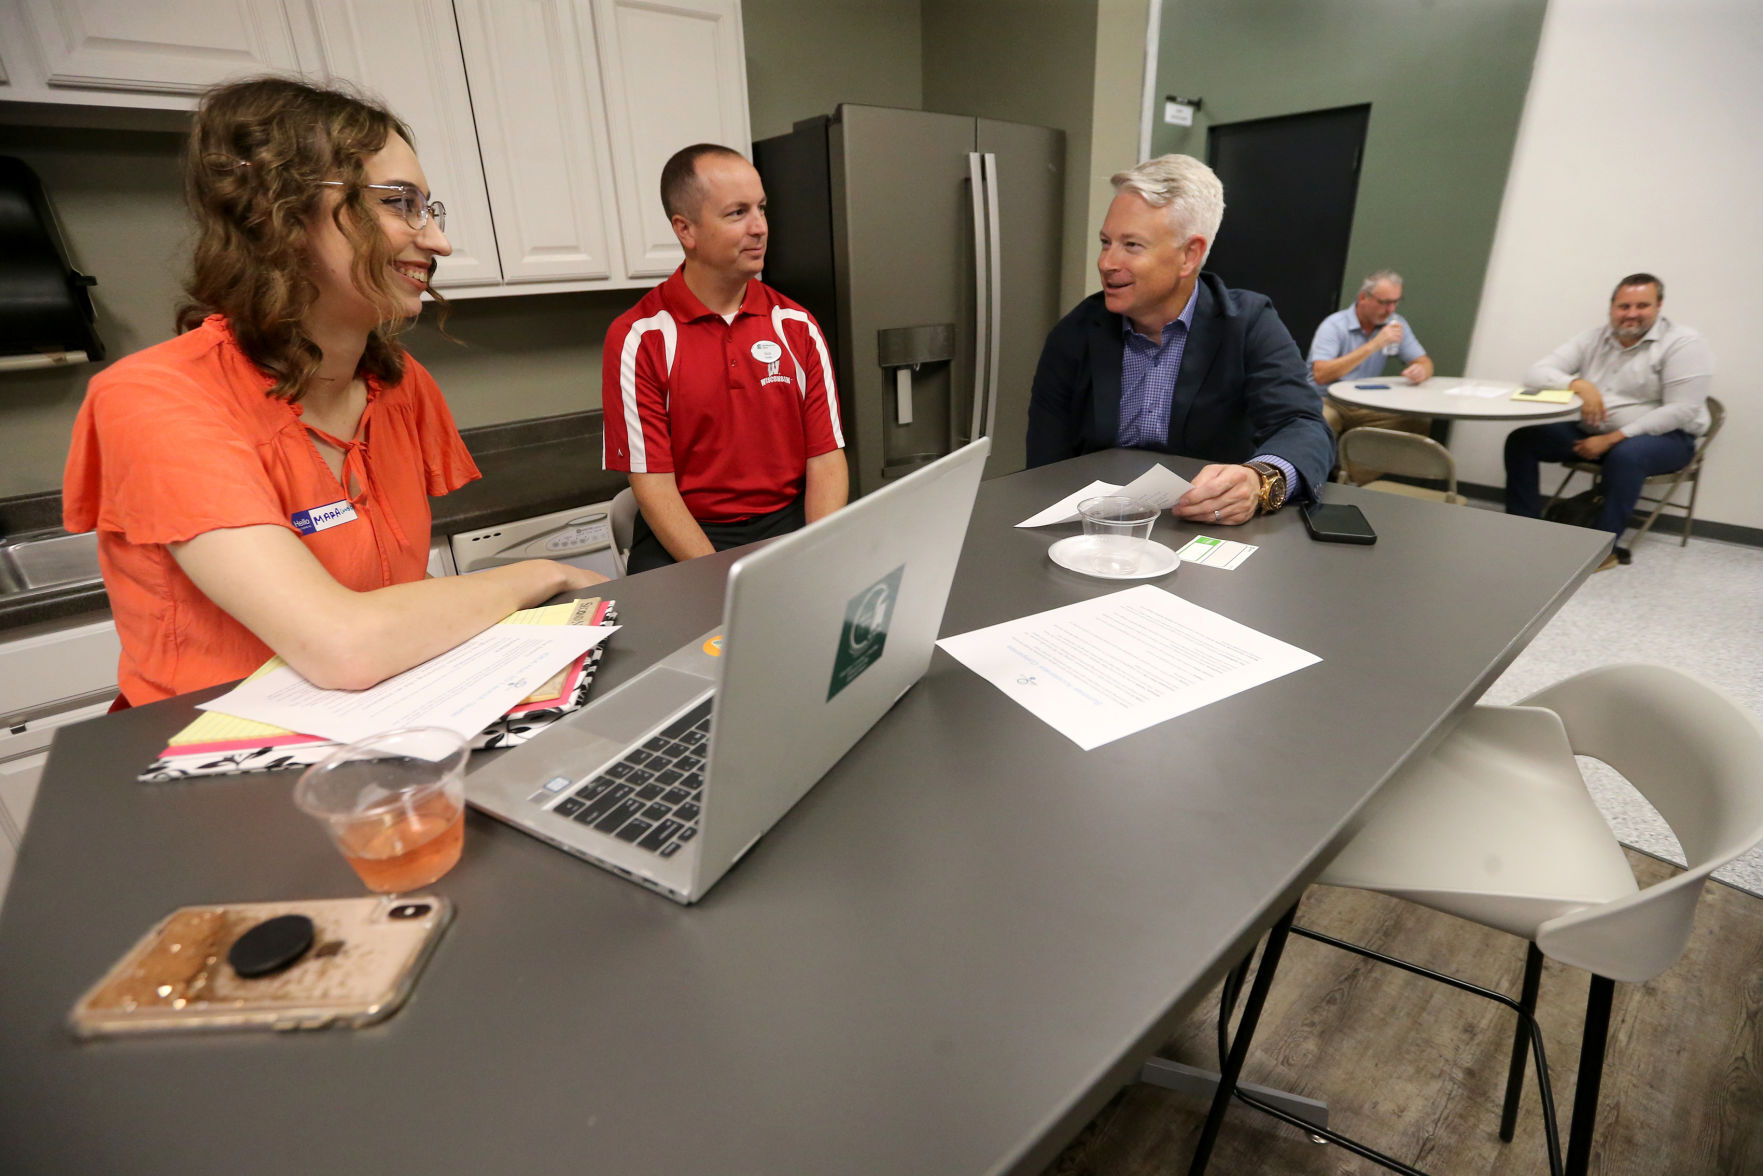 Mara Keyes (from left), Nicholas Felder and John Miller discuss ideas during the grand opening of the Innovation Driving Entrepreneurship Accelerator Hub, known as the IDEA Hub, at Platteville Business Incubator in Platteville, Wis., on Monday.    PHOTO CREDIT: JESSICA REILLY